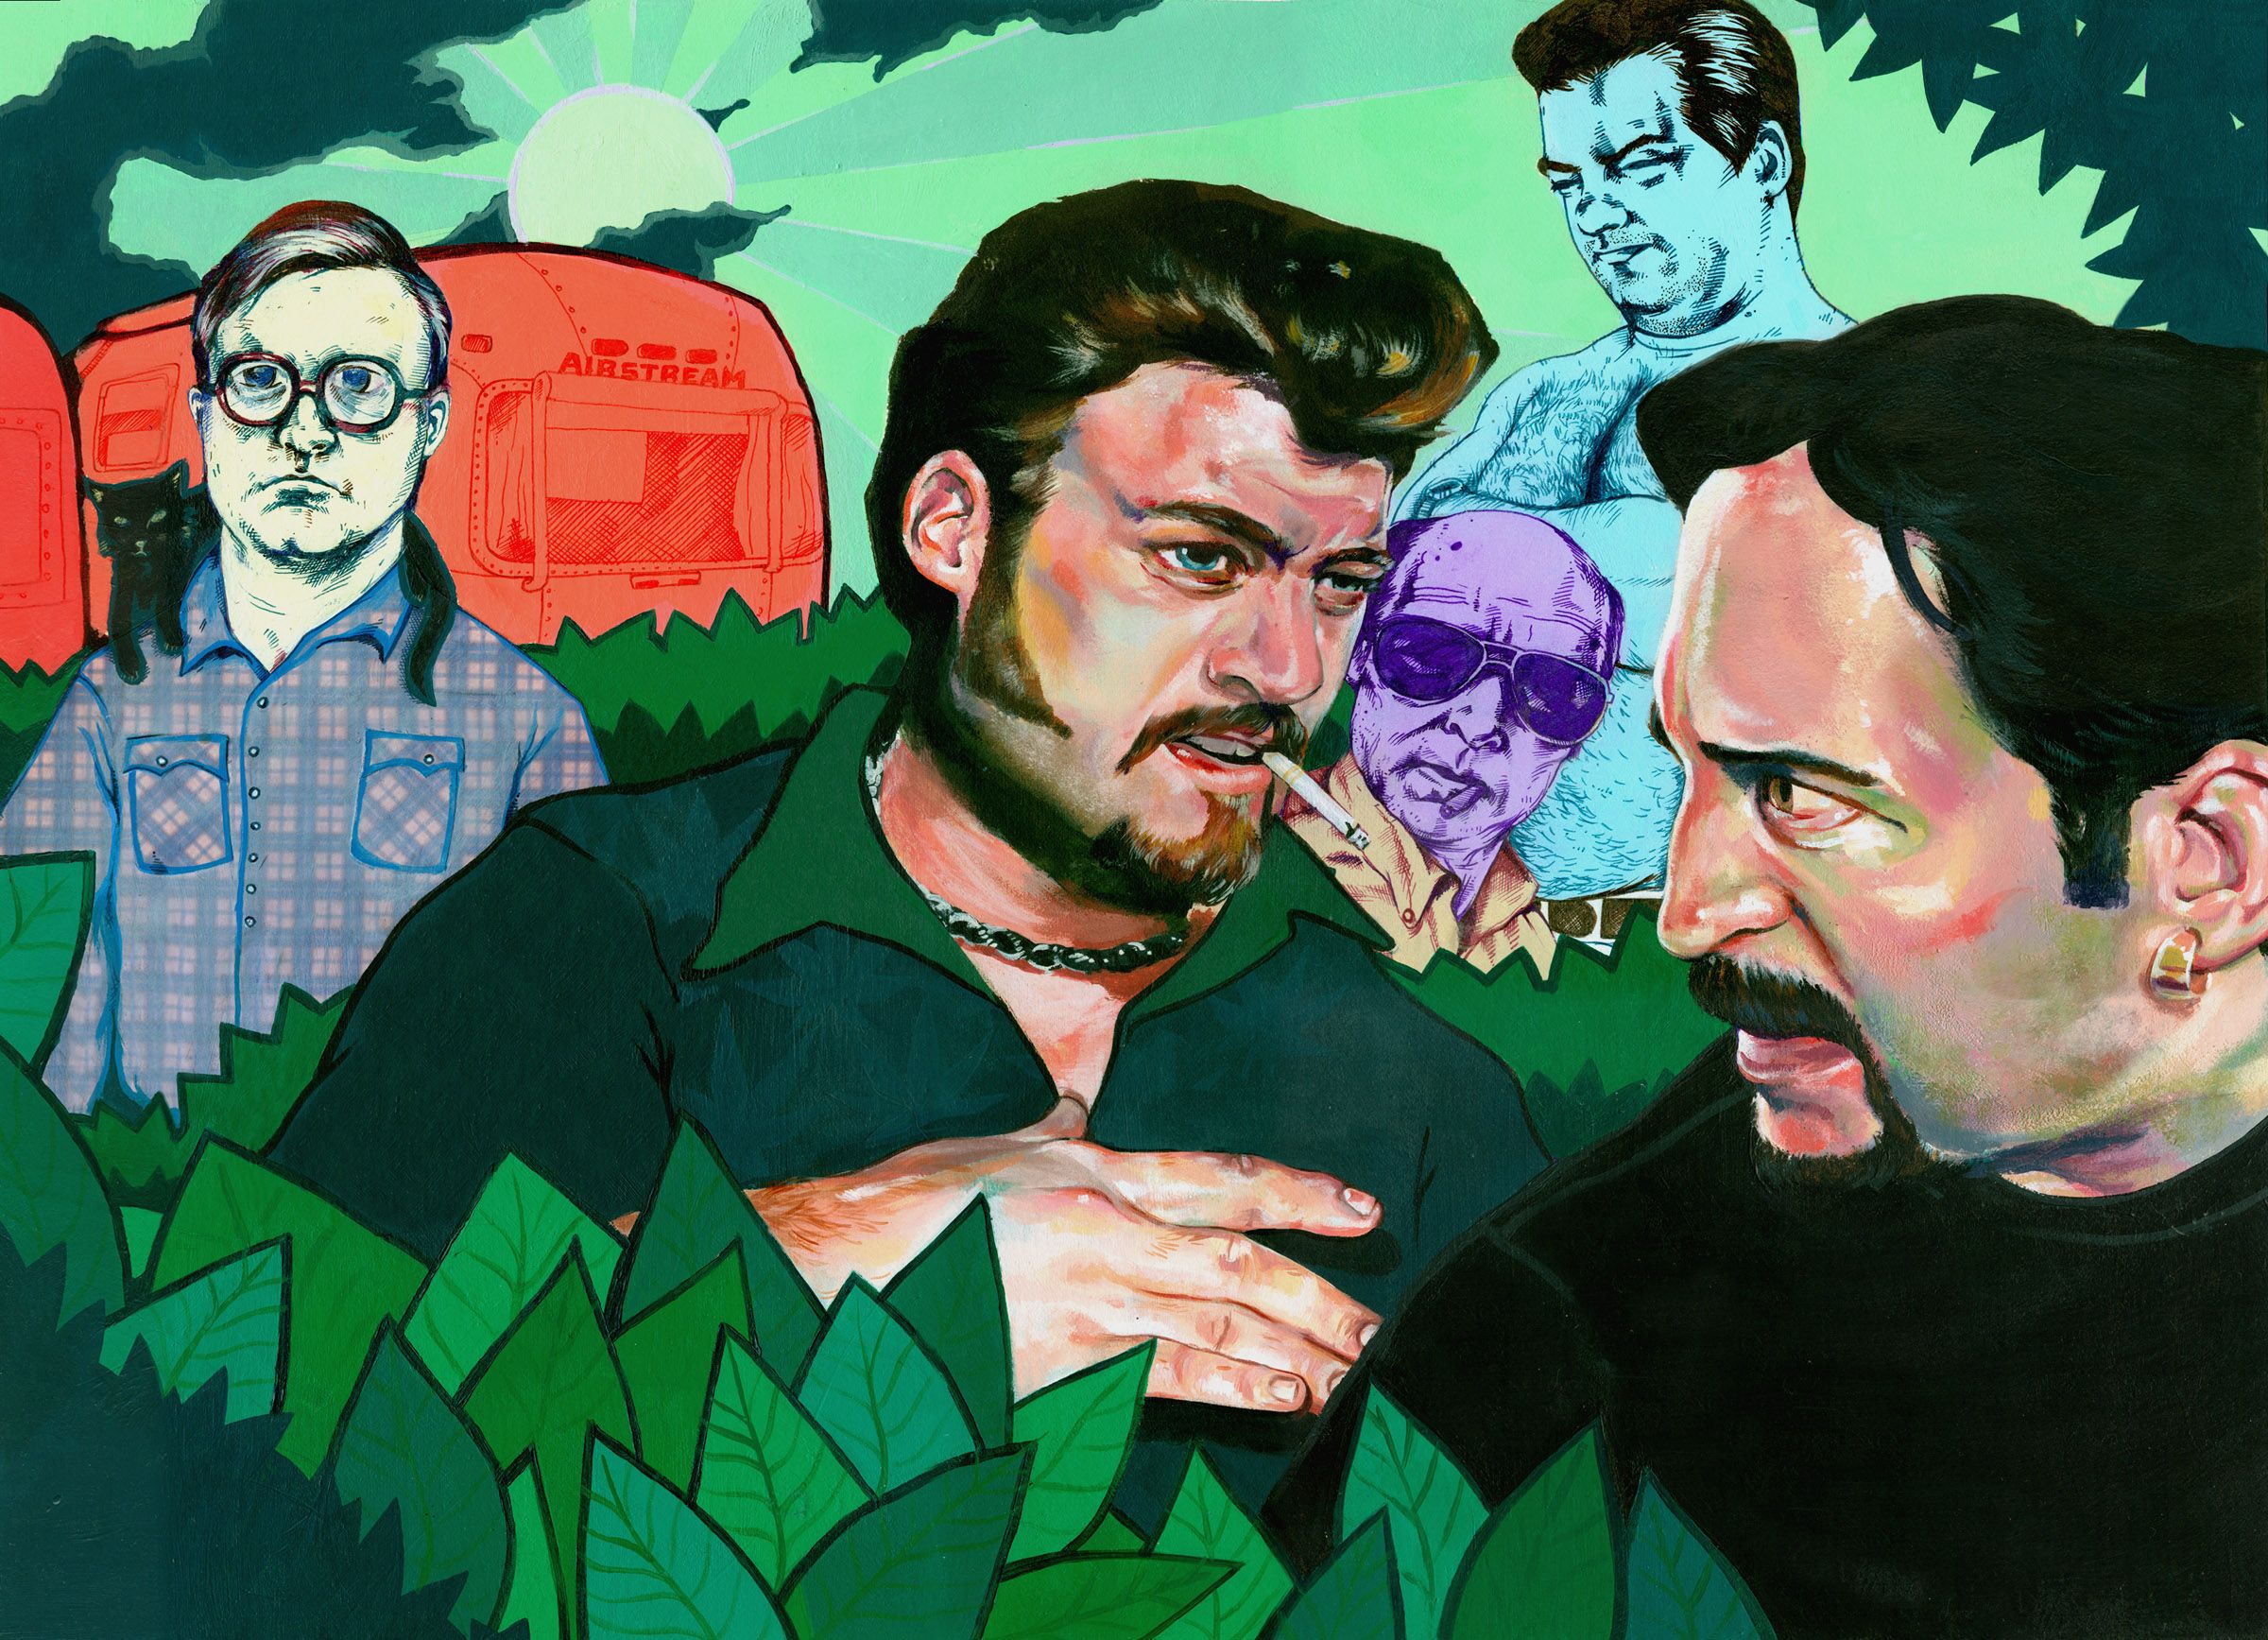 Trailer Park Boys Wallpapers | Just Good Vibe